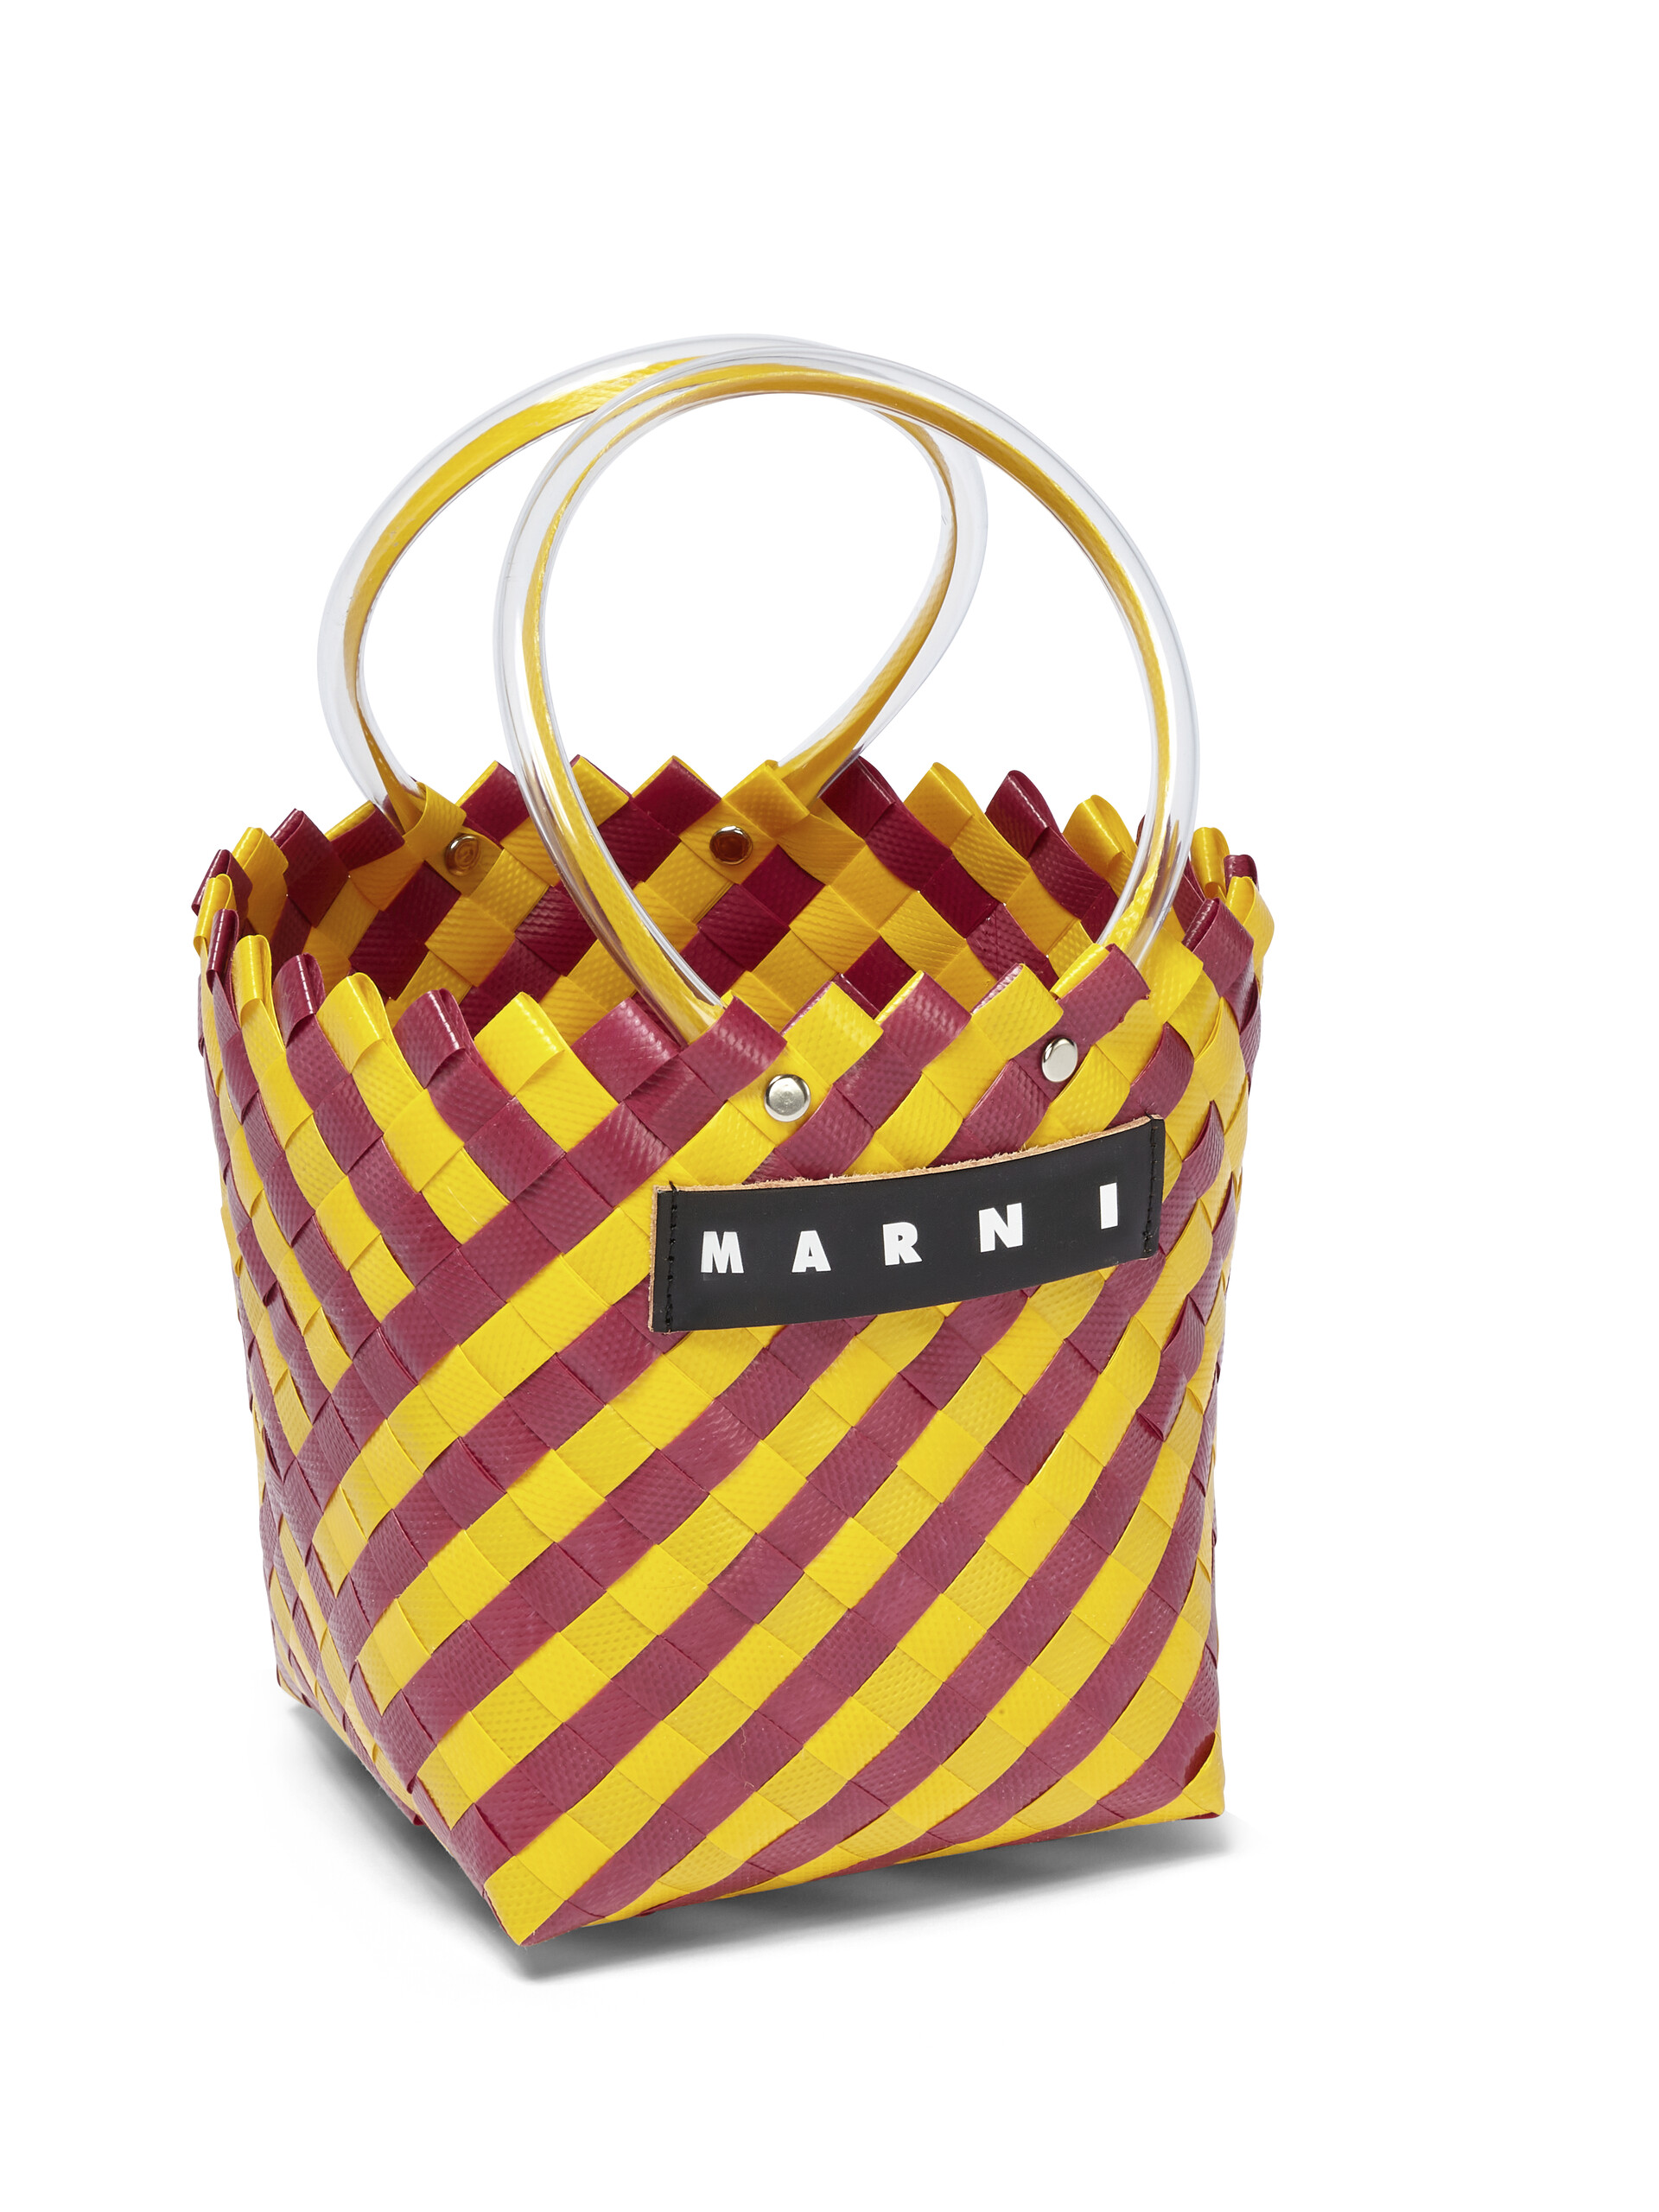 MARNI MARKET TAHA bag in blue and white woven material - Shopping Bags - Image 4